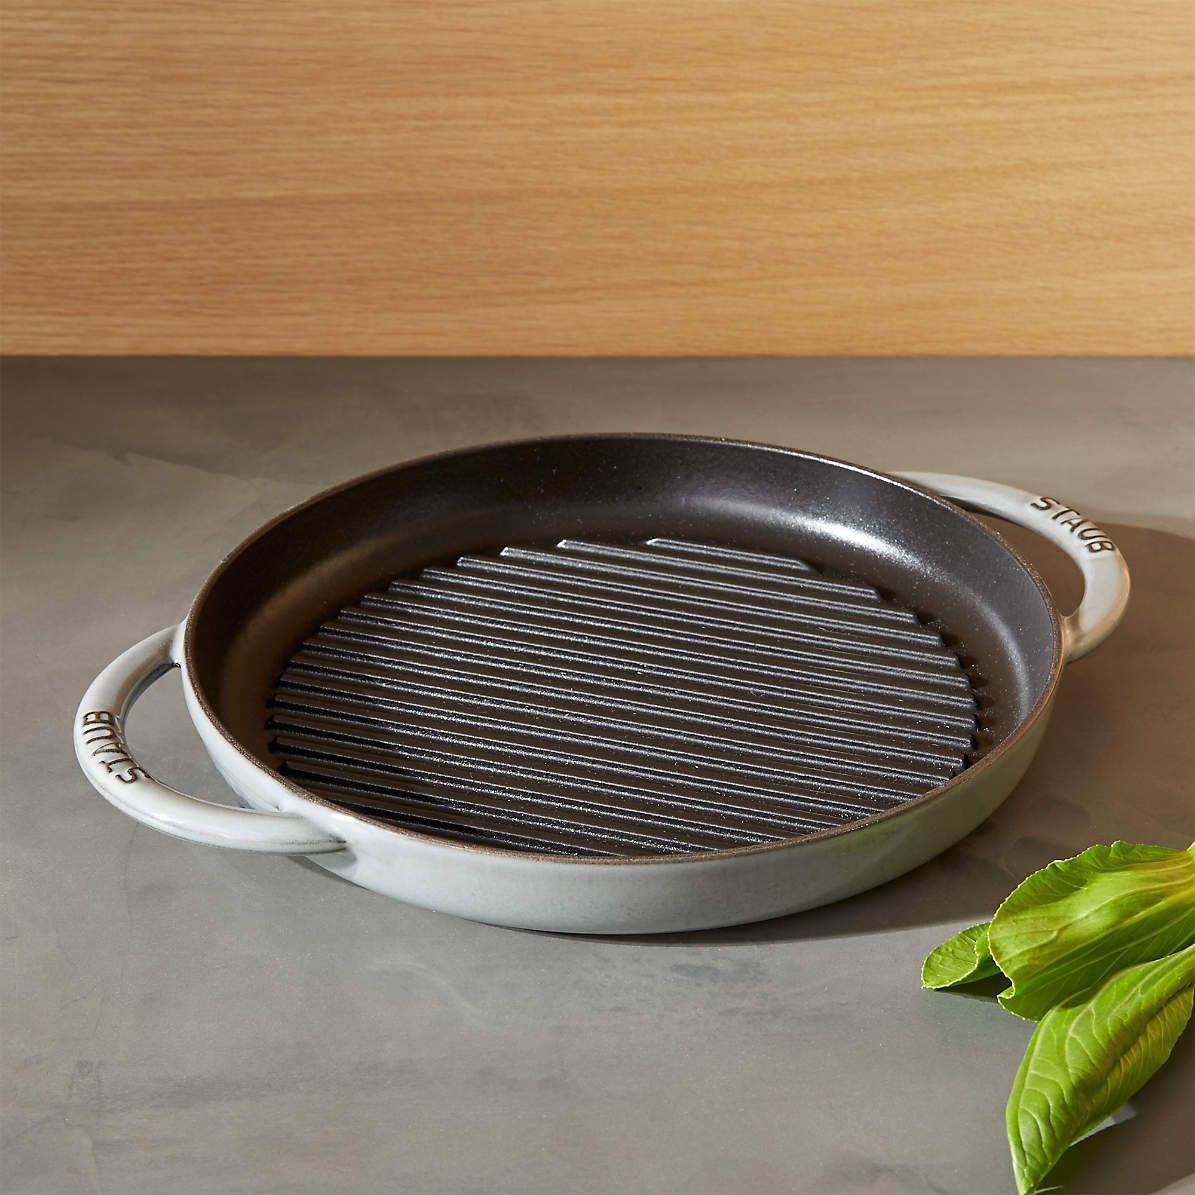 Staub 10-Inch Round Enameled Cast Iron Double Handle Grill Pan